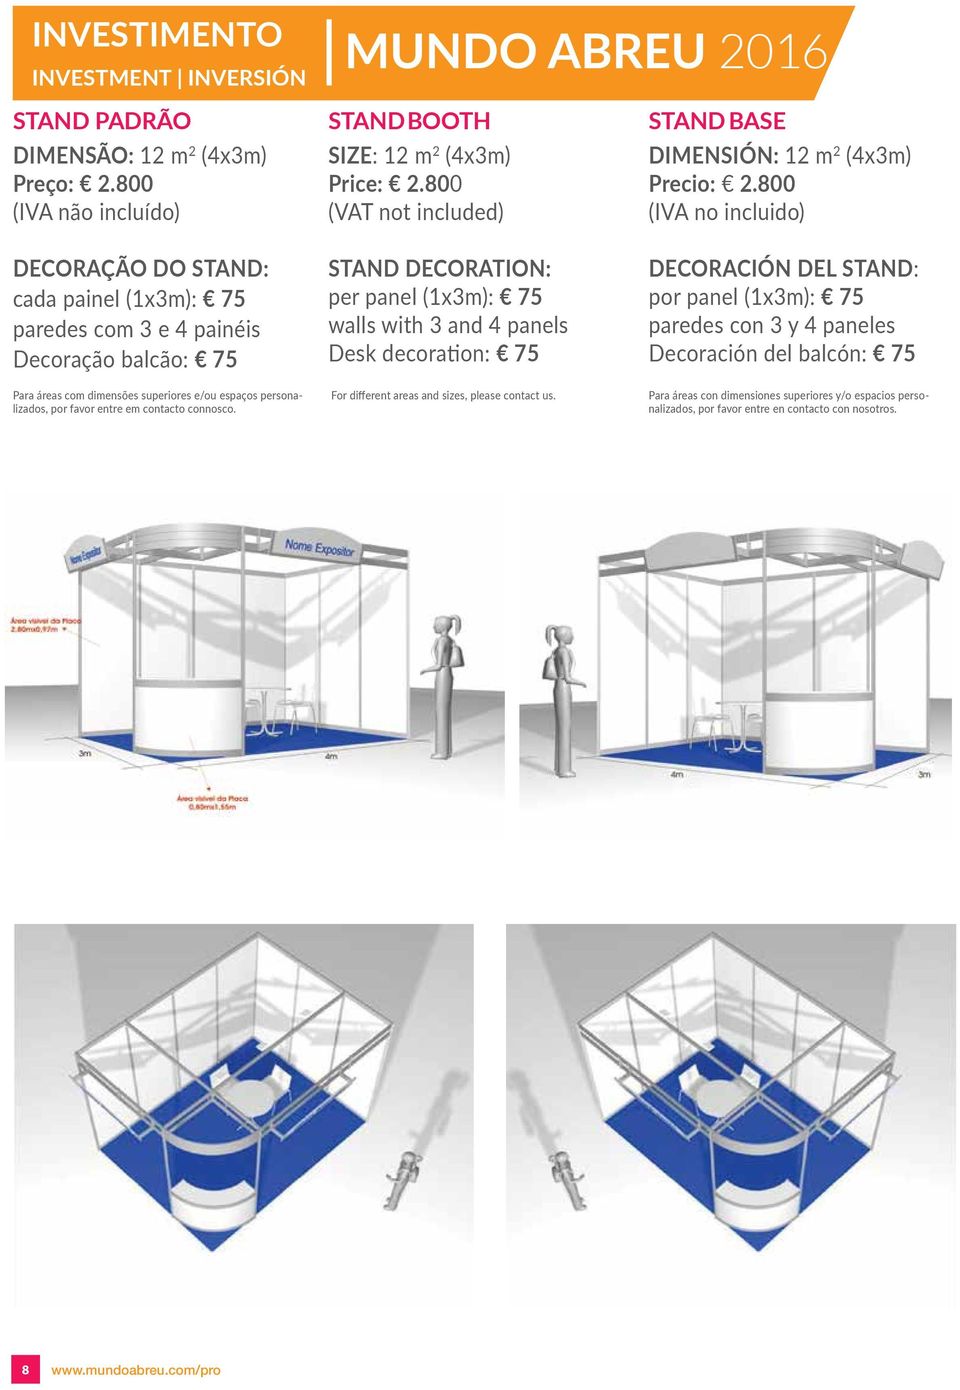 contacto connosco. STAND BOOTH SIZE: 12 m 2 (4x3m) Price: 2.